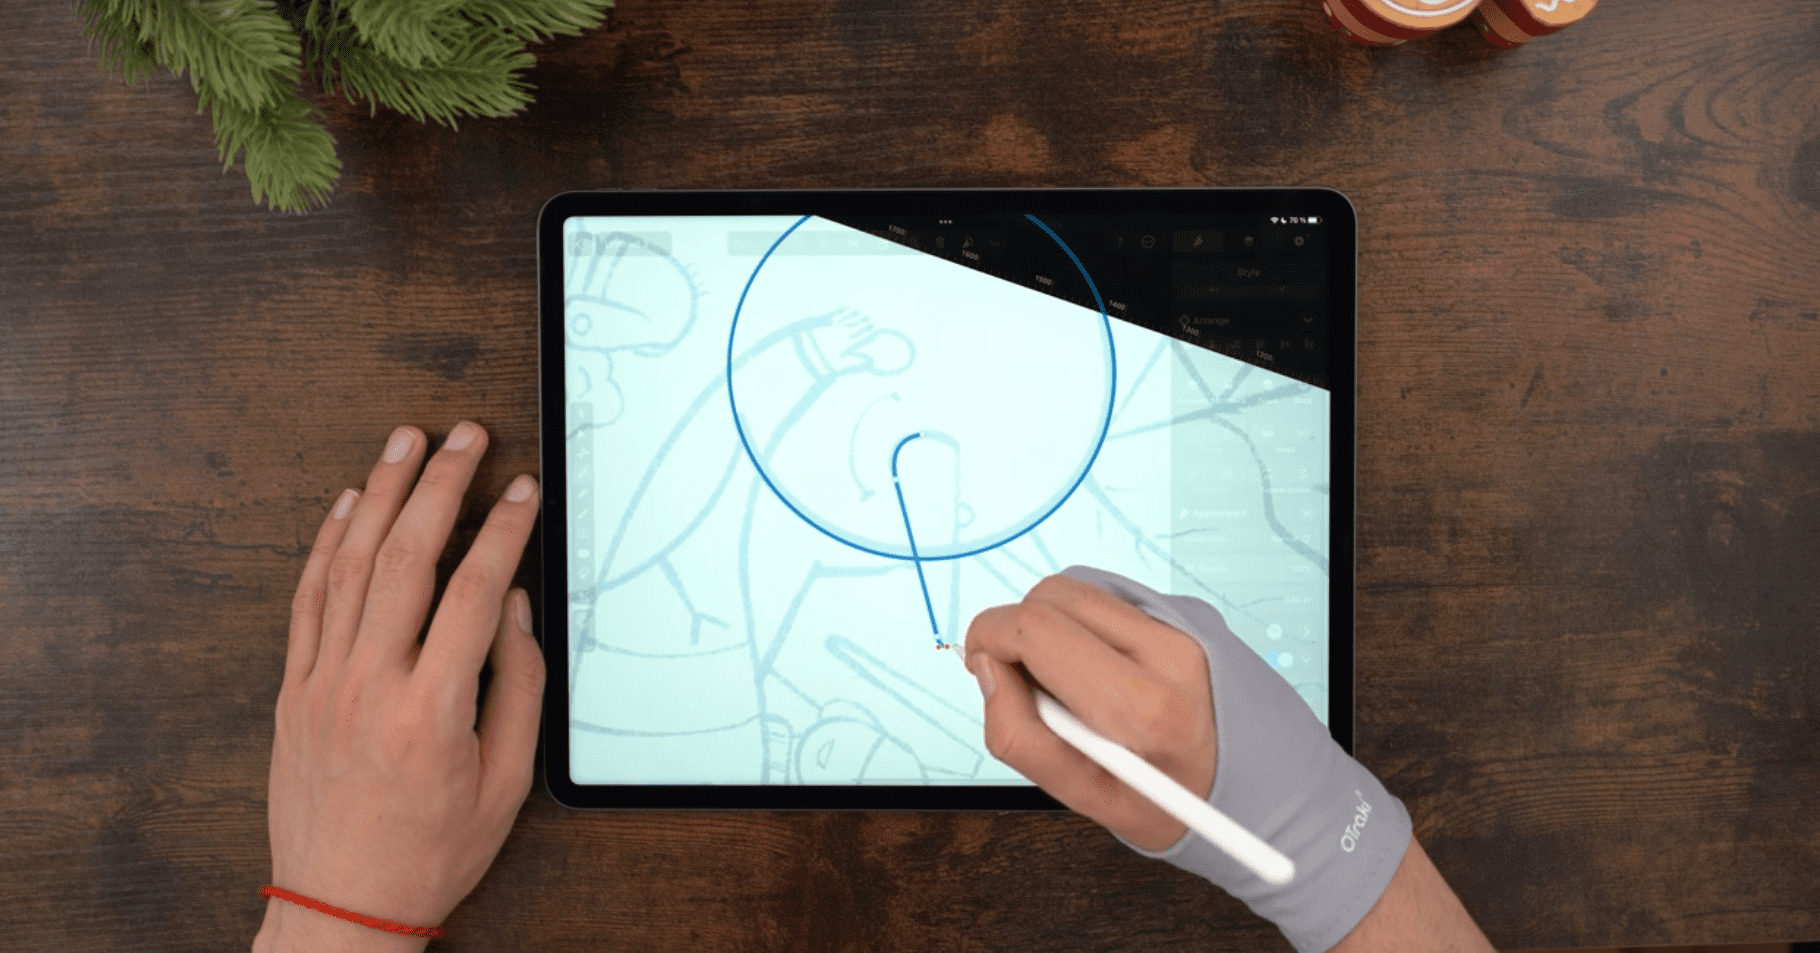 Male hands drawing on an iPad positioned on a wooden table